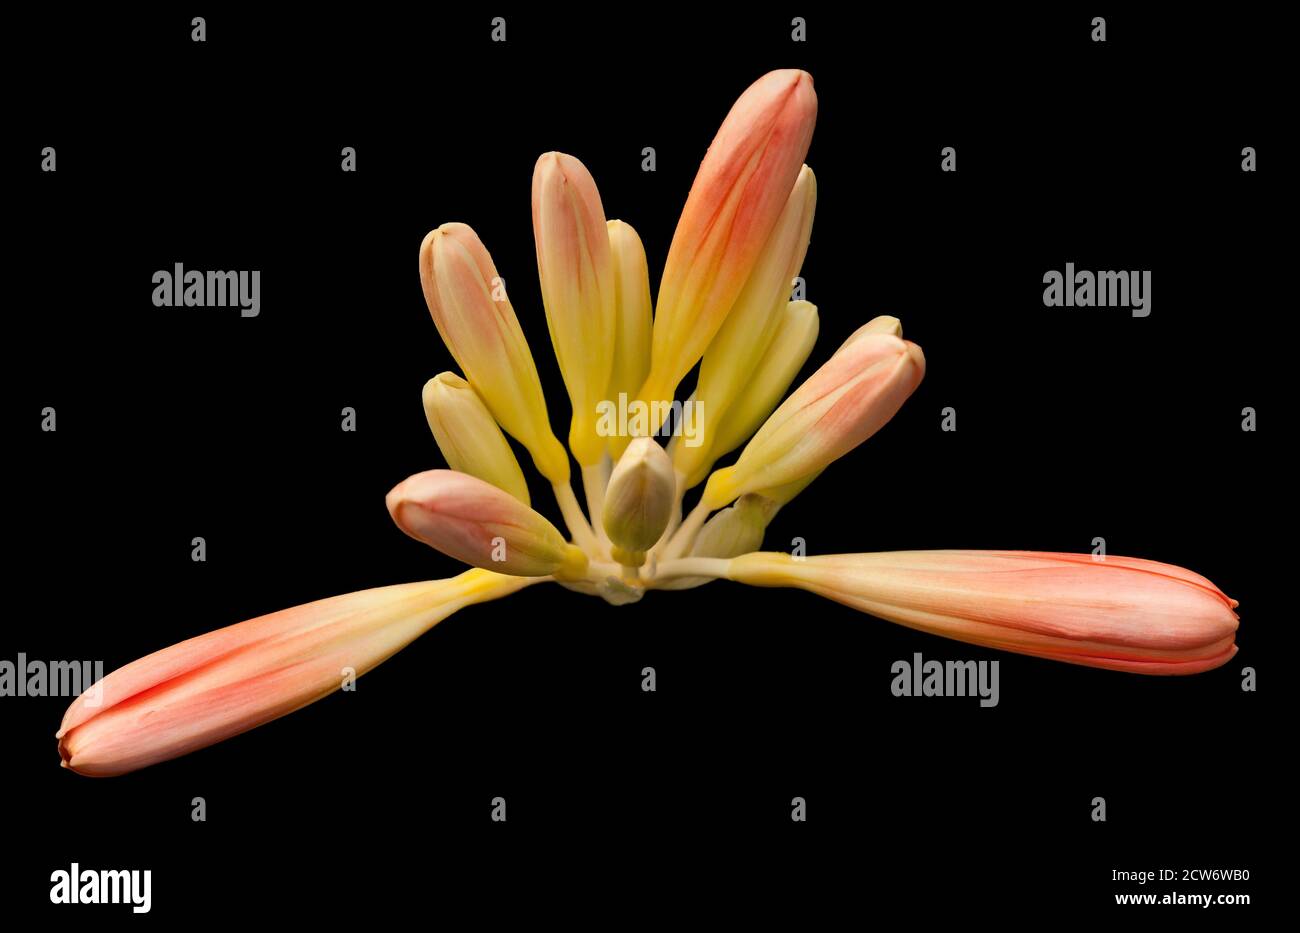 A flower on a black back ground Stock Photo